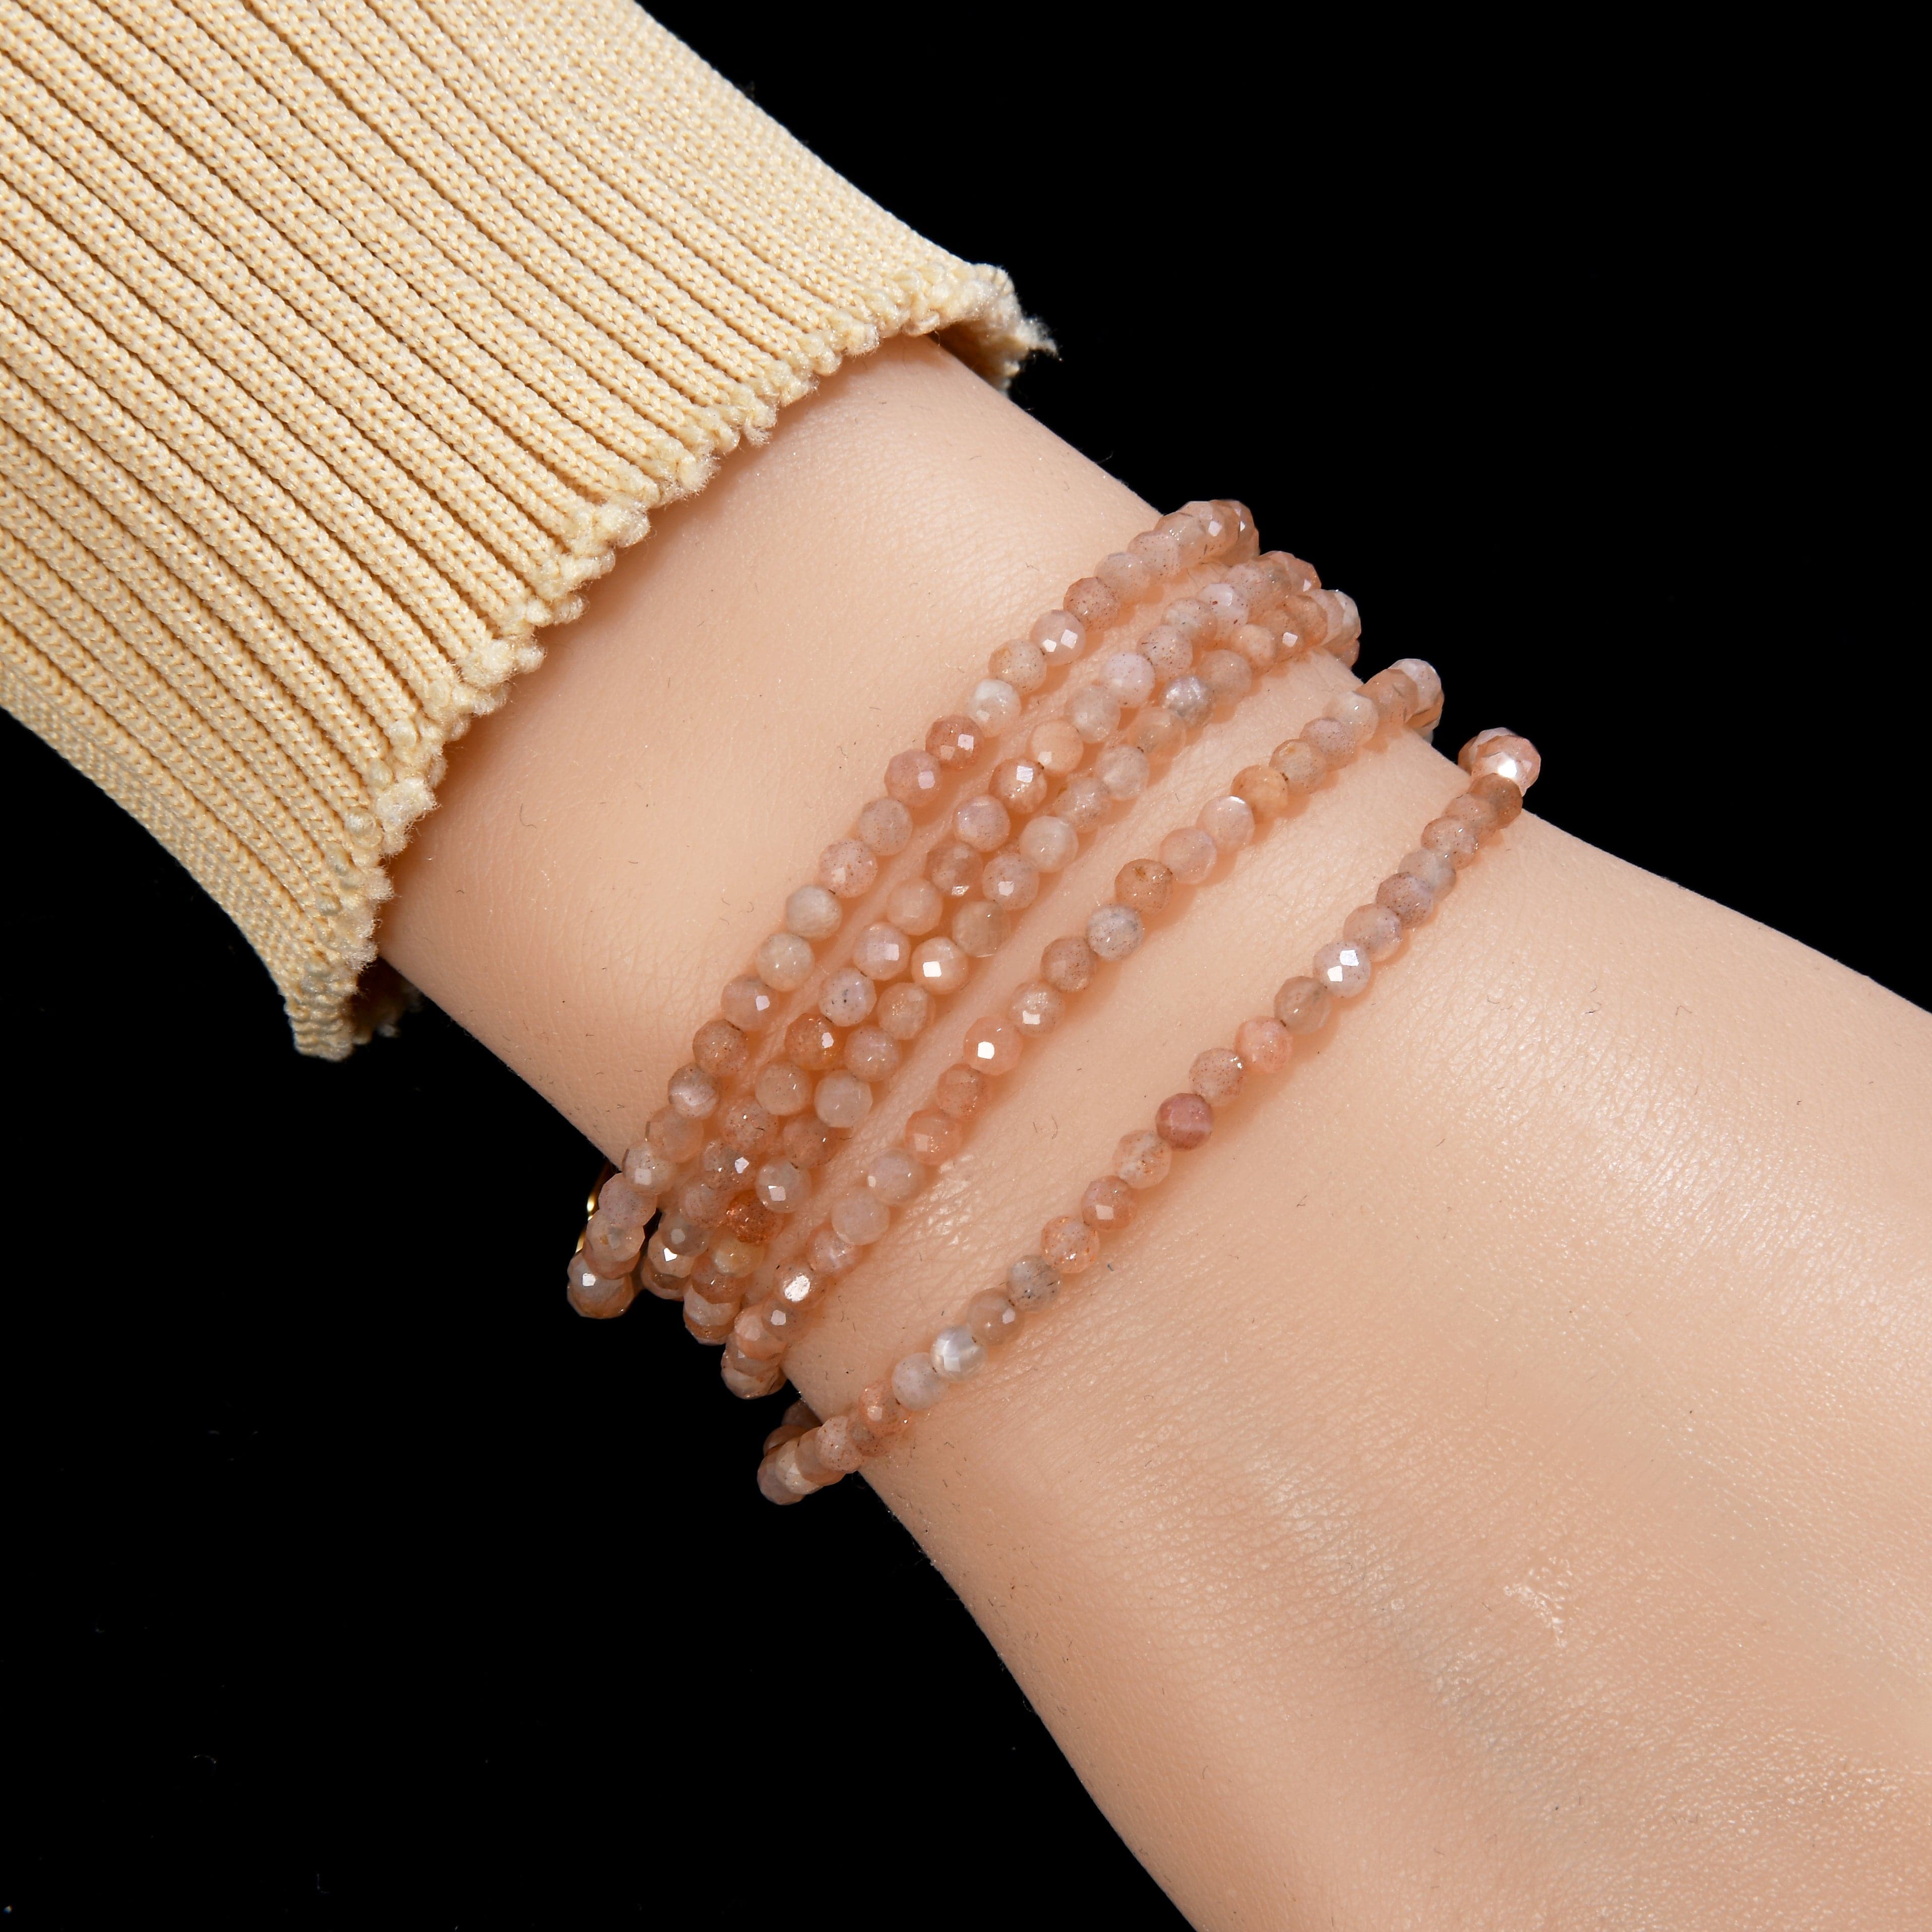 KALIFANO Gemstone Jewelry 3mm Peach Moonstone Faceted 31" Necklace / Multi Wrap Bracelet N3-79G-PM